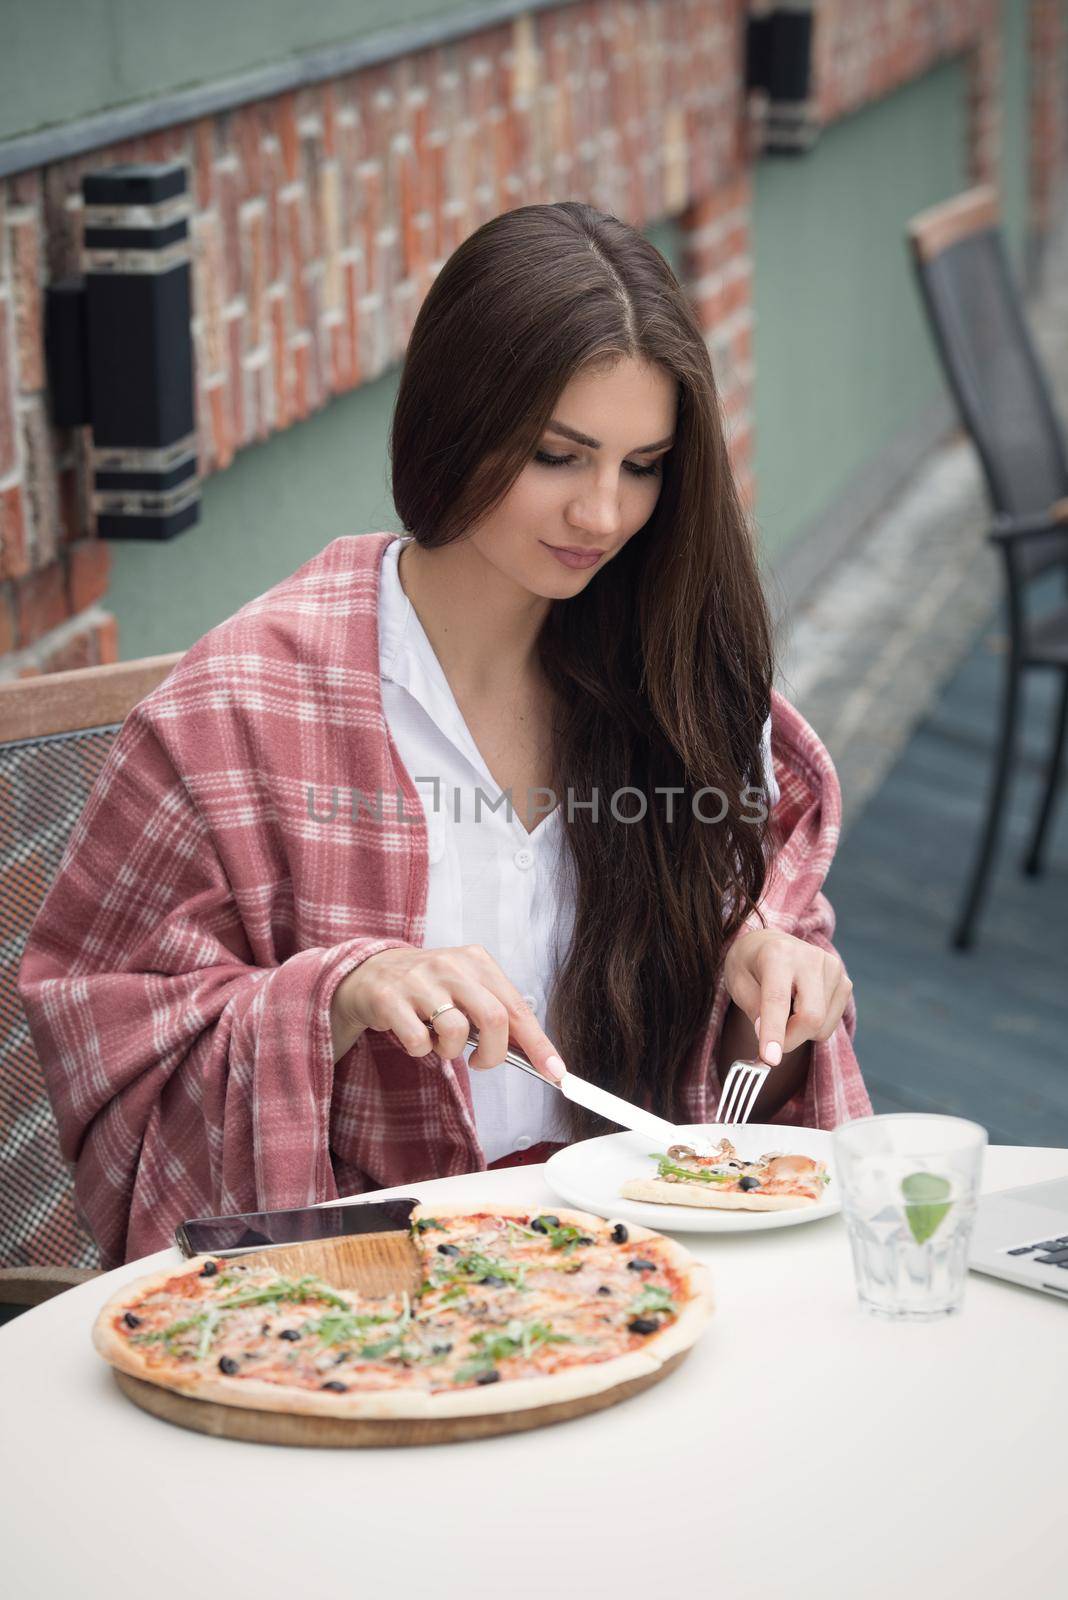 Beautiful brunette girl in a white blouse eating pizza at restaurant. Outdoors